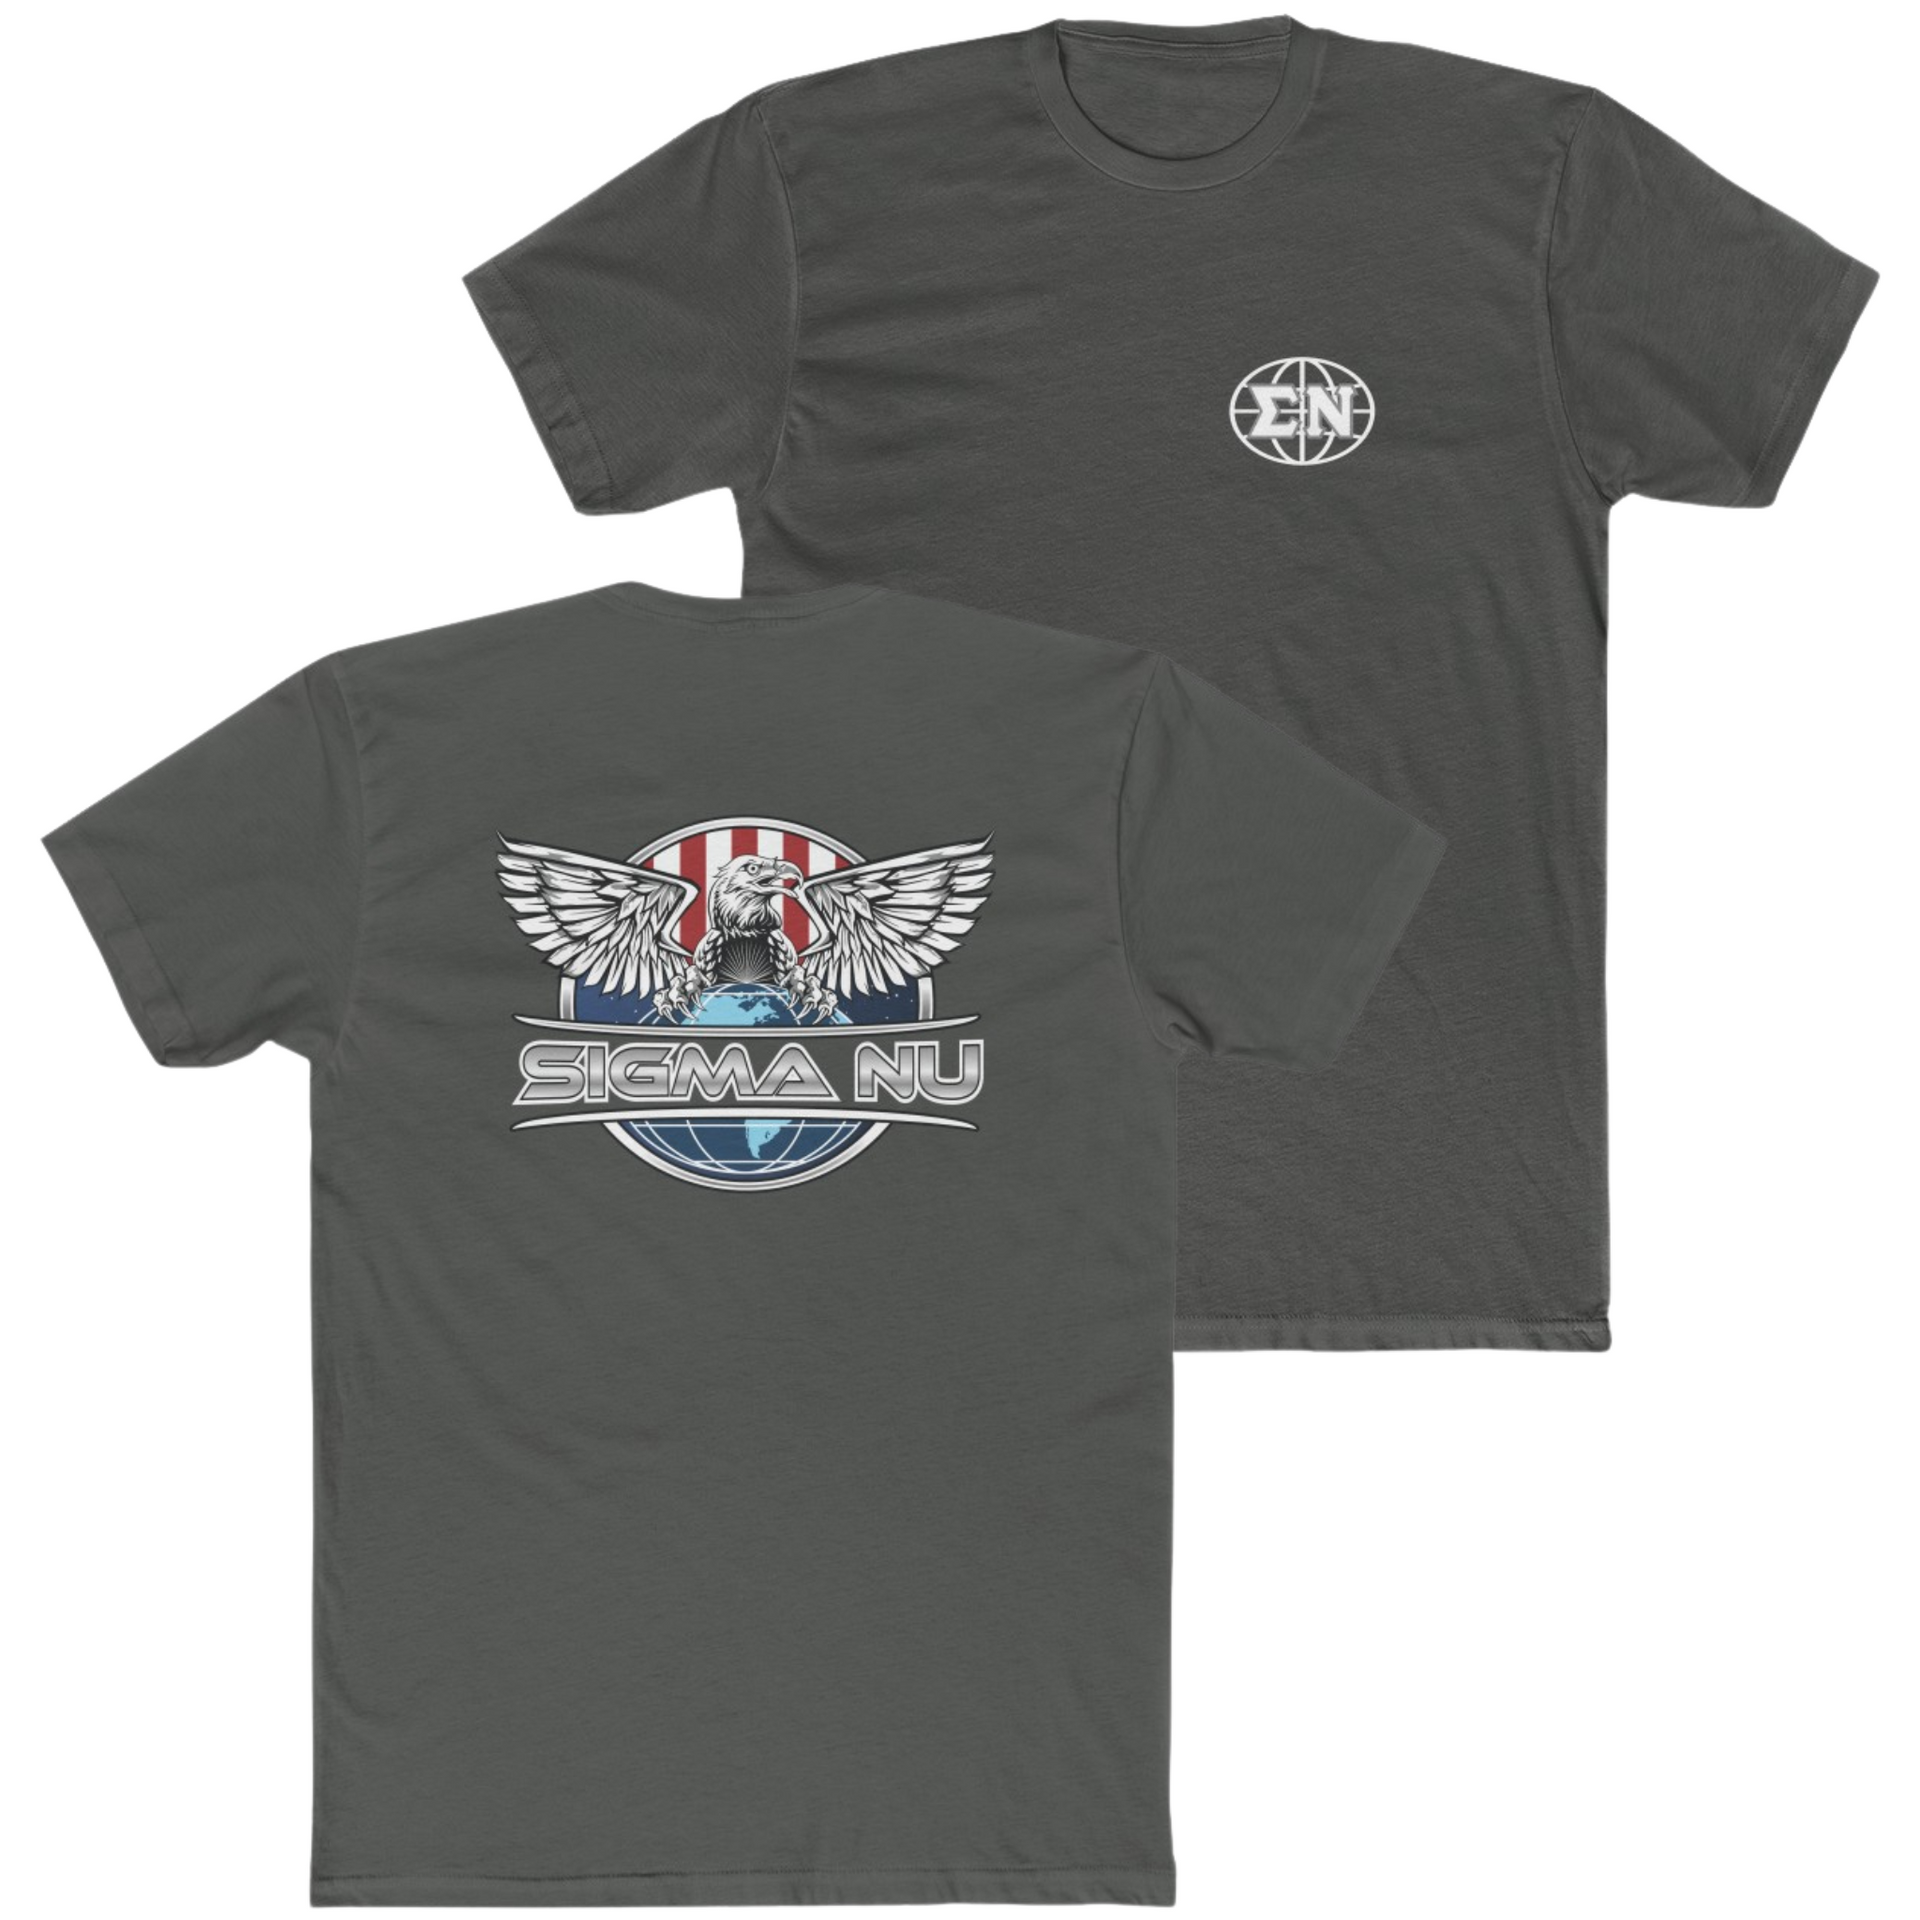 Grey Sigma Nu Graphic T-Shirt | The Fraternal Order |Sigma Nu Clothing, Apparel and Merchandise